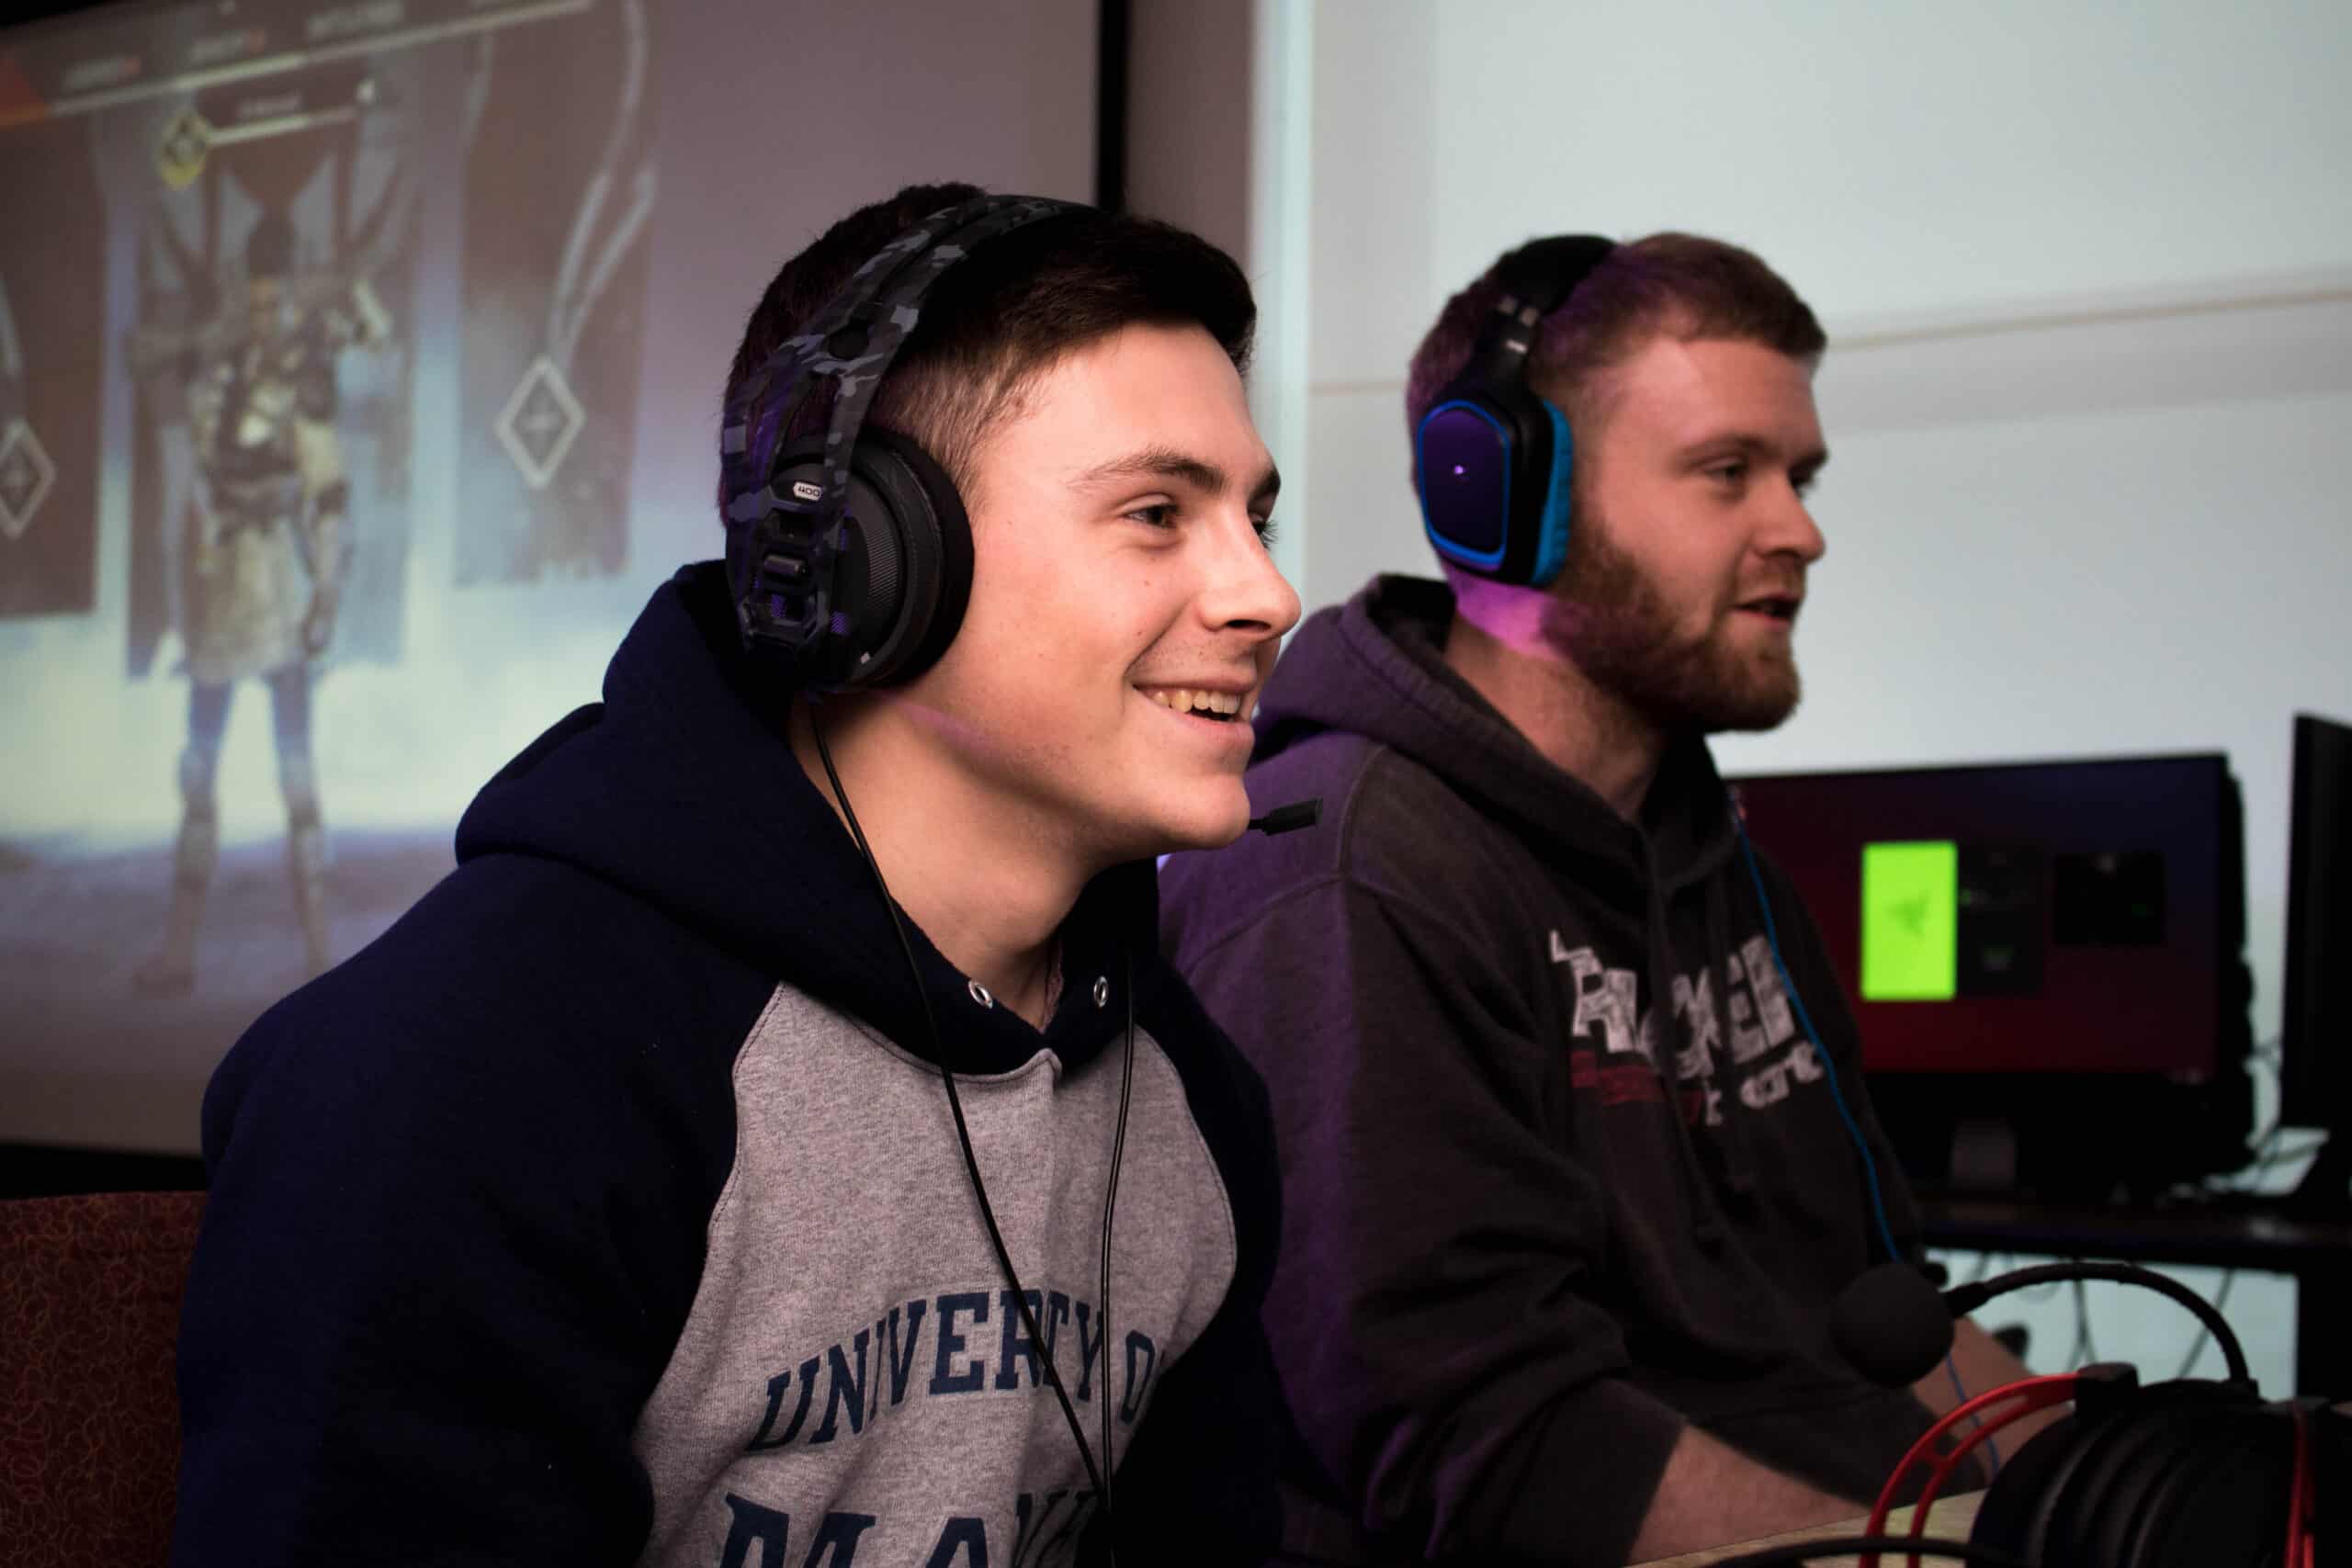 Two young men wearing headphones, smile at a computer that is off screen, They seem to be playing video games.